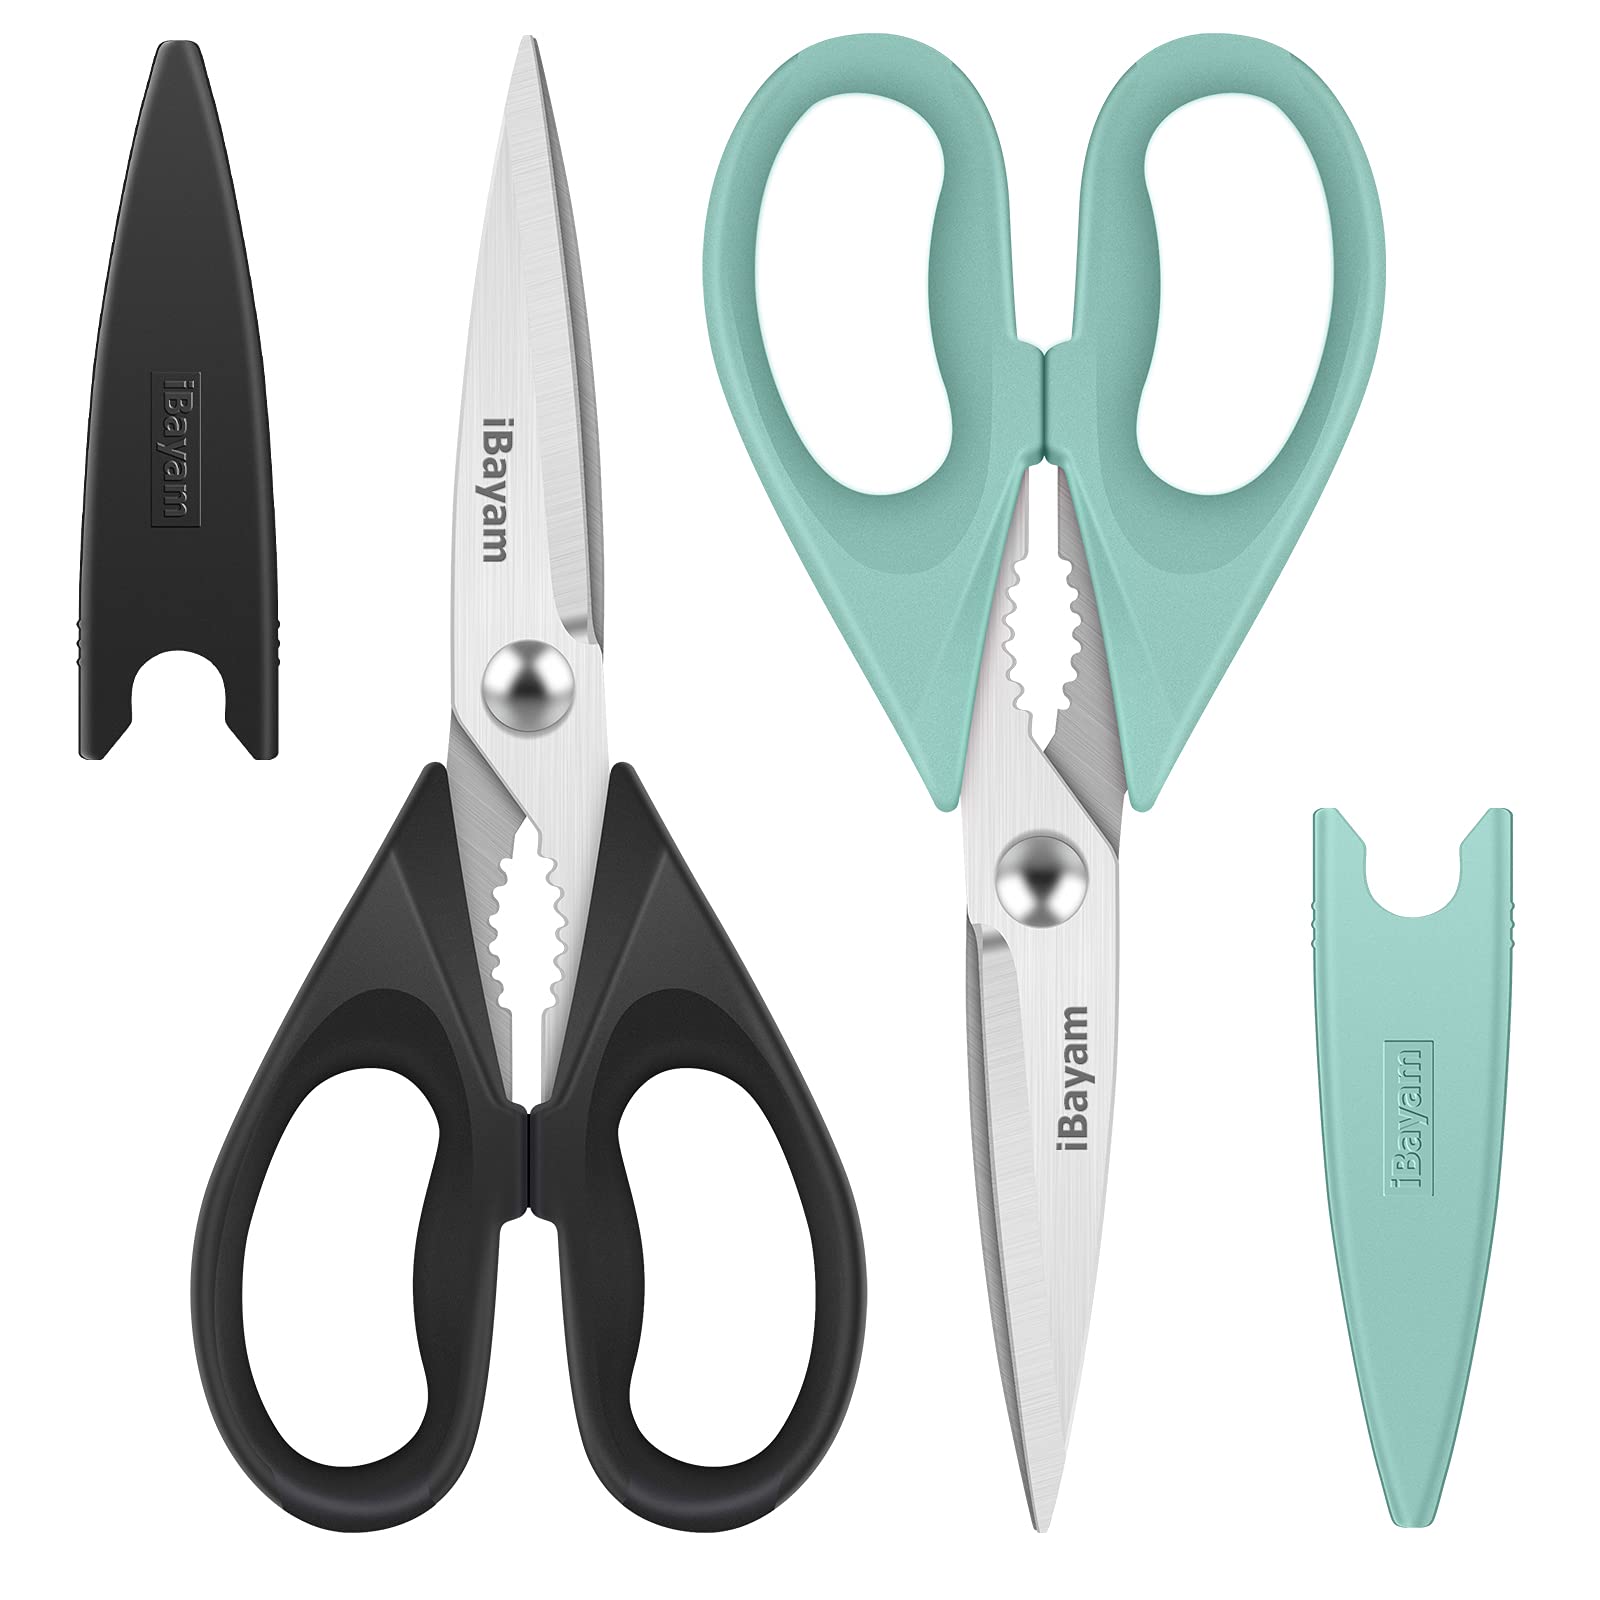 Must Have Gadgets For The Home - iBayam Kitchen Shears